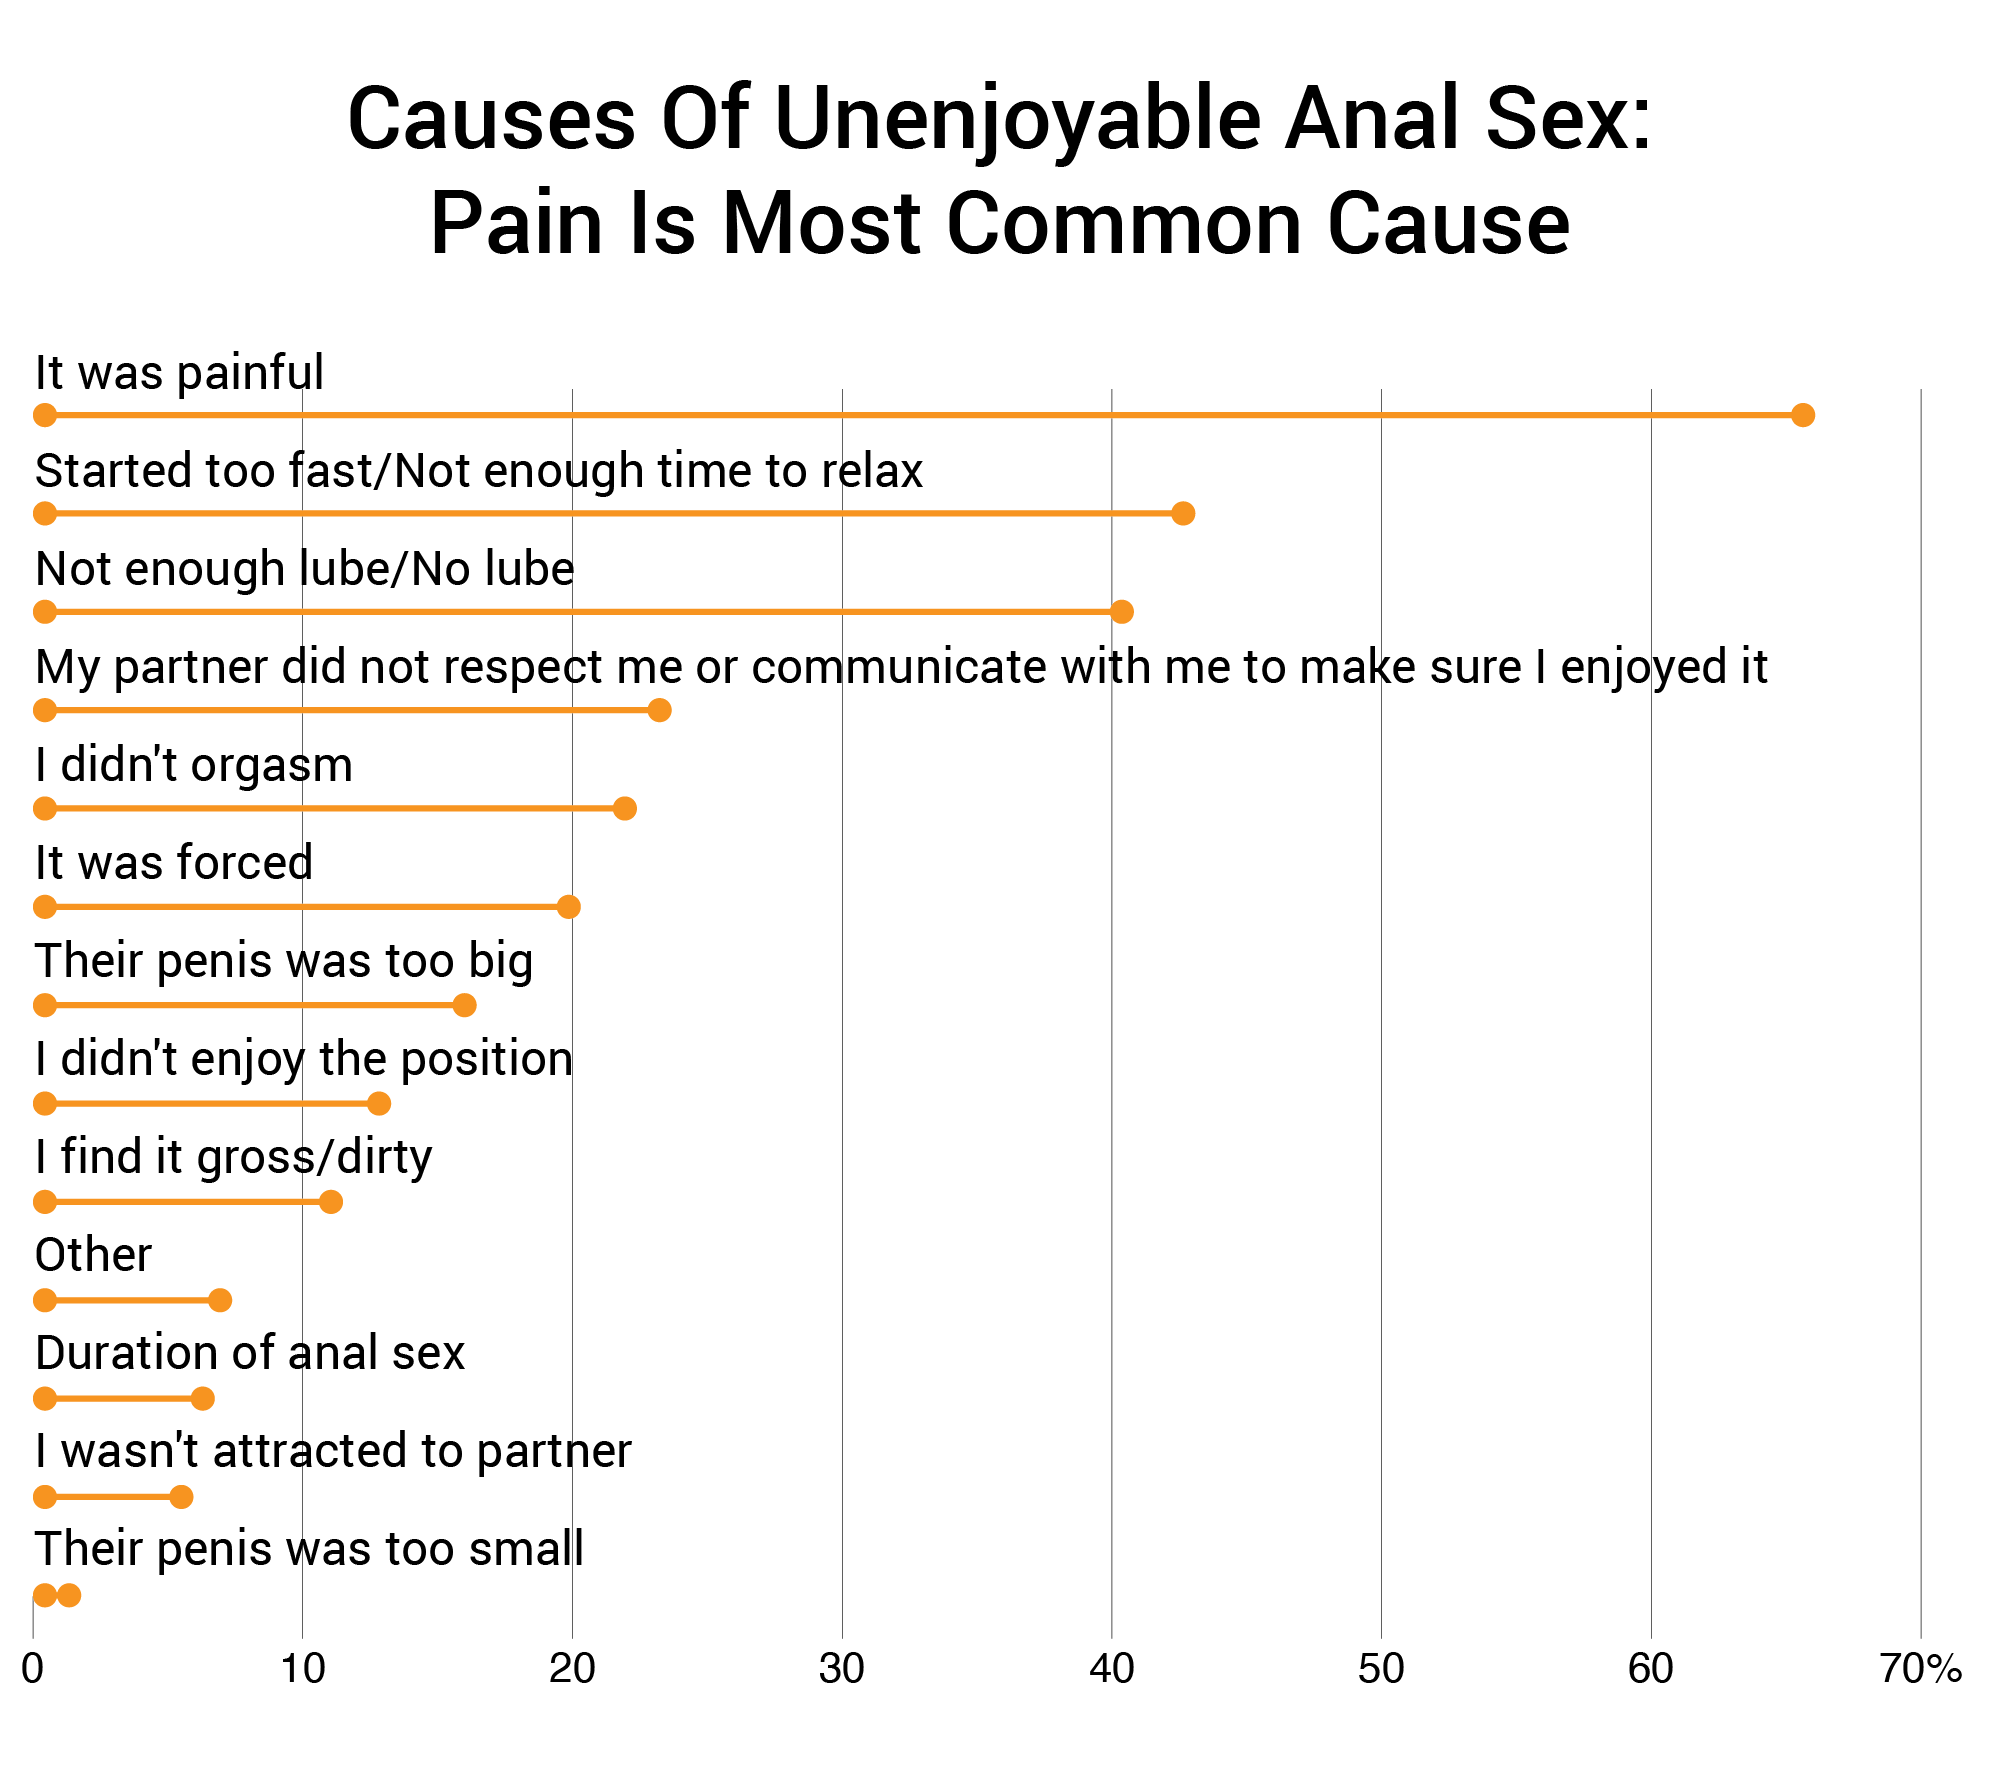 pain is the most common cause of unenjoyable anal sex